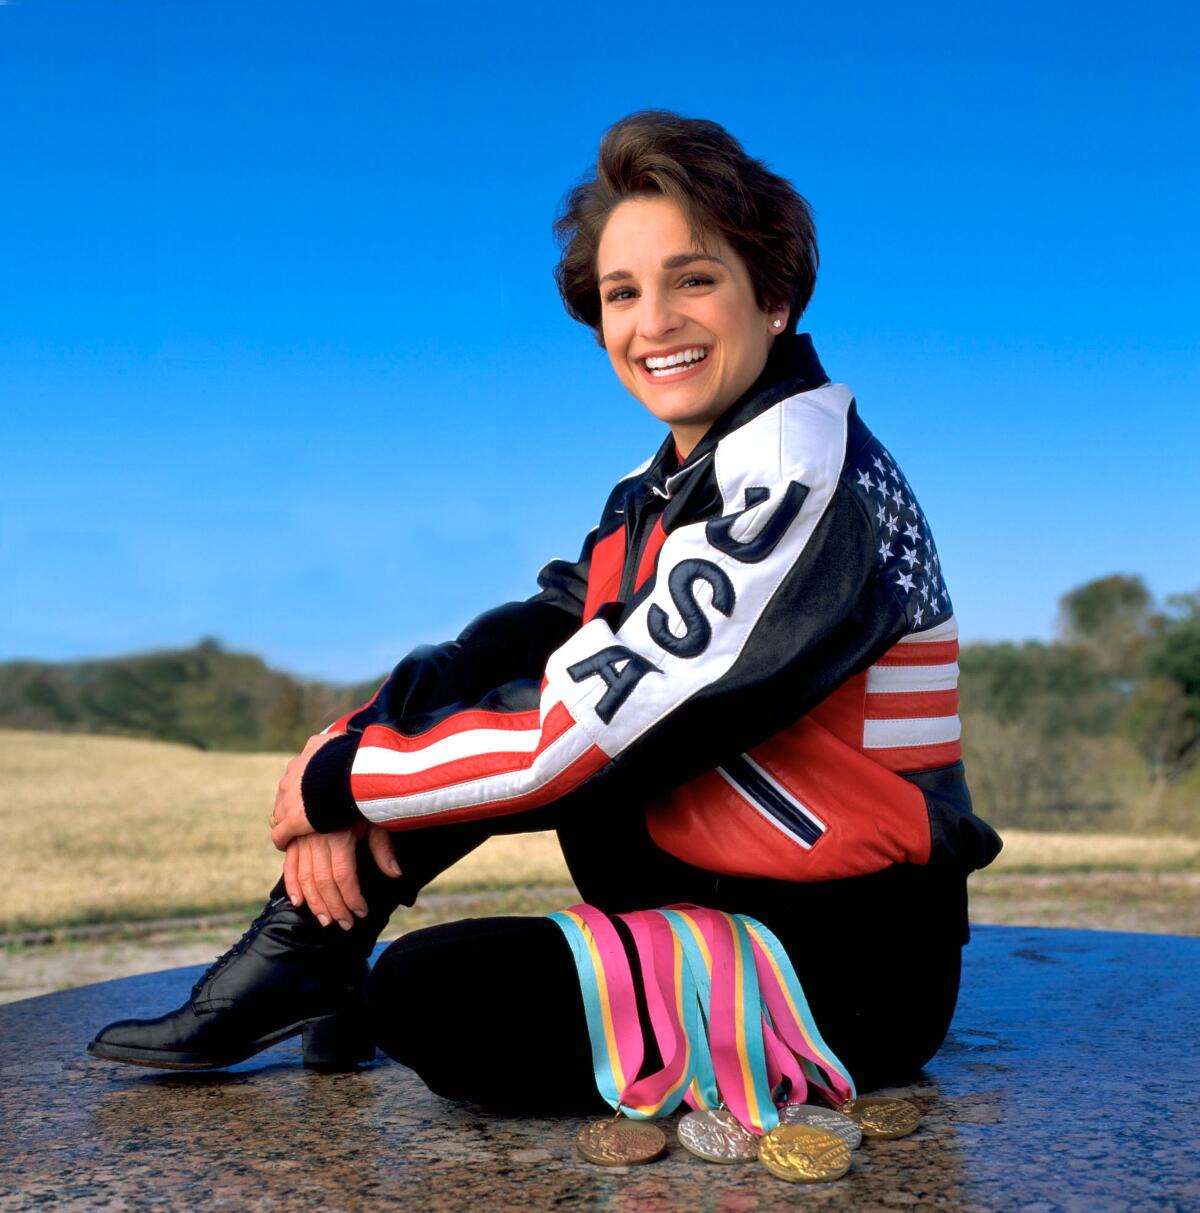 Mary Lou Retton smiles and poses in a USA tracksuit for a photo shoot in 2000.